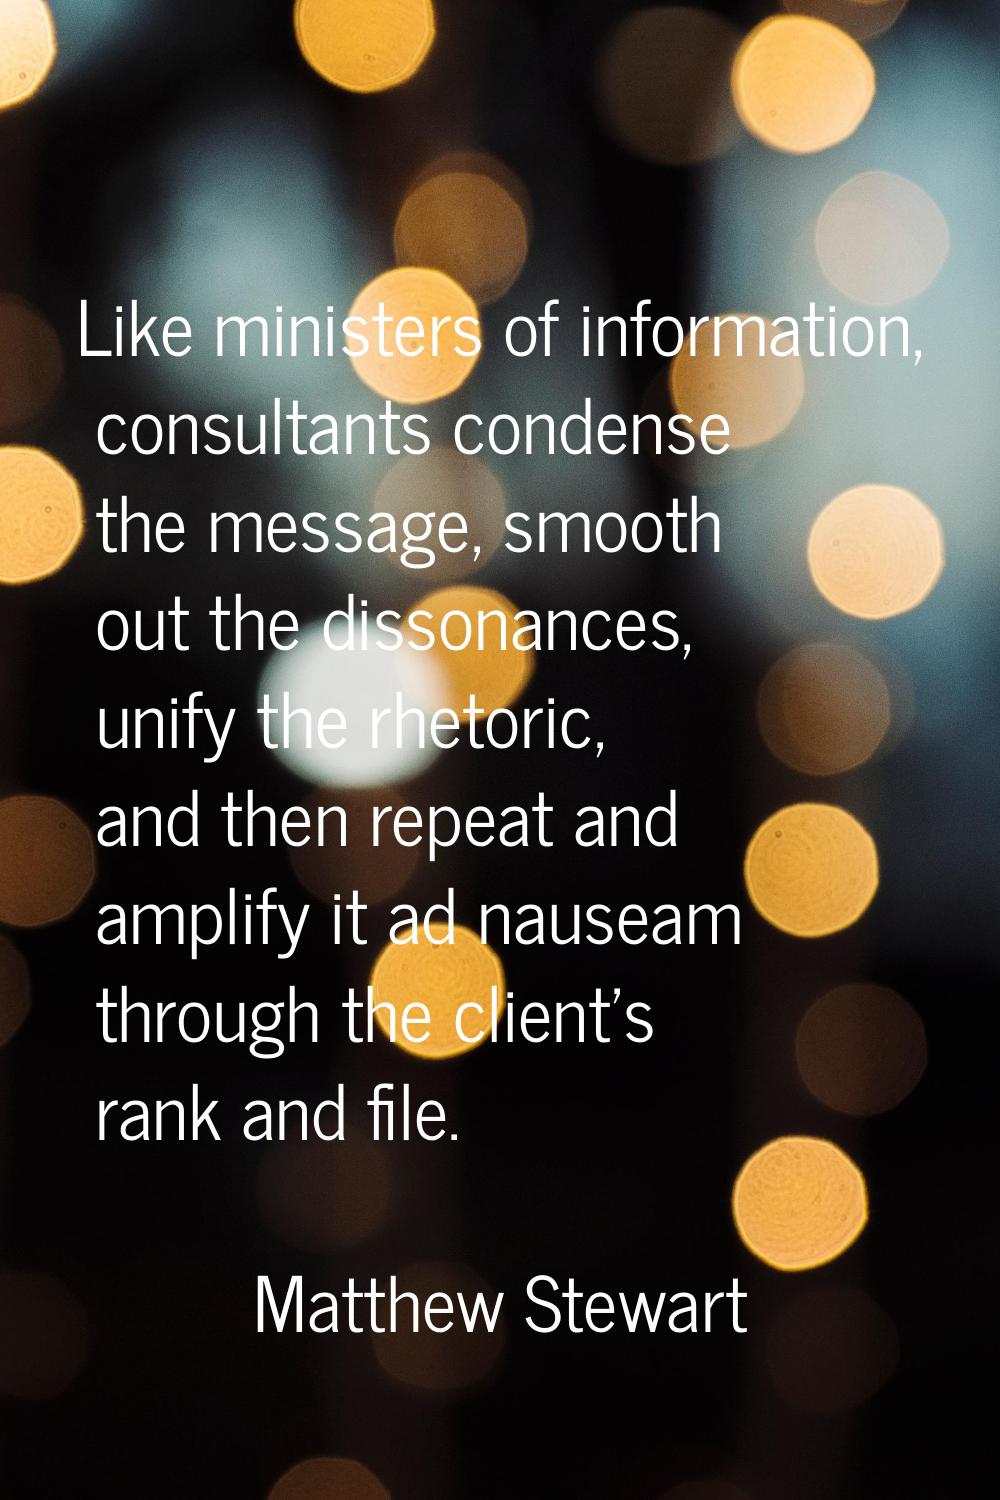 Like ministers of information, consultants condense the message, smooth out the dissonances, unify 